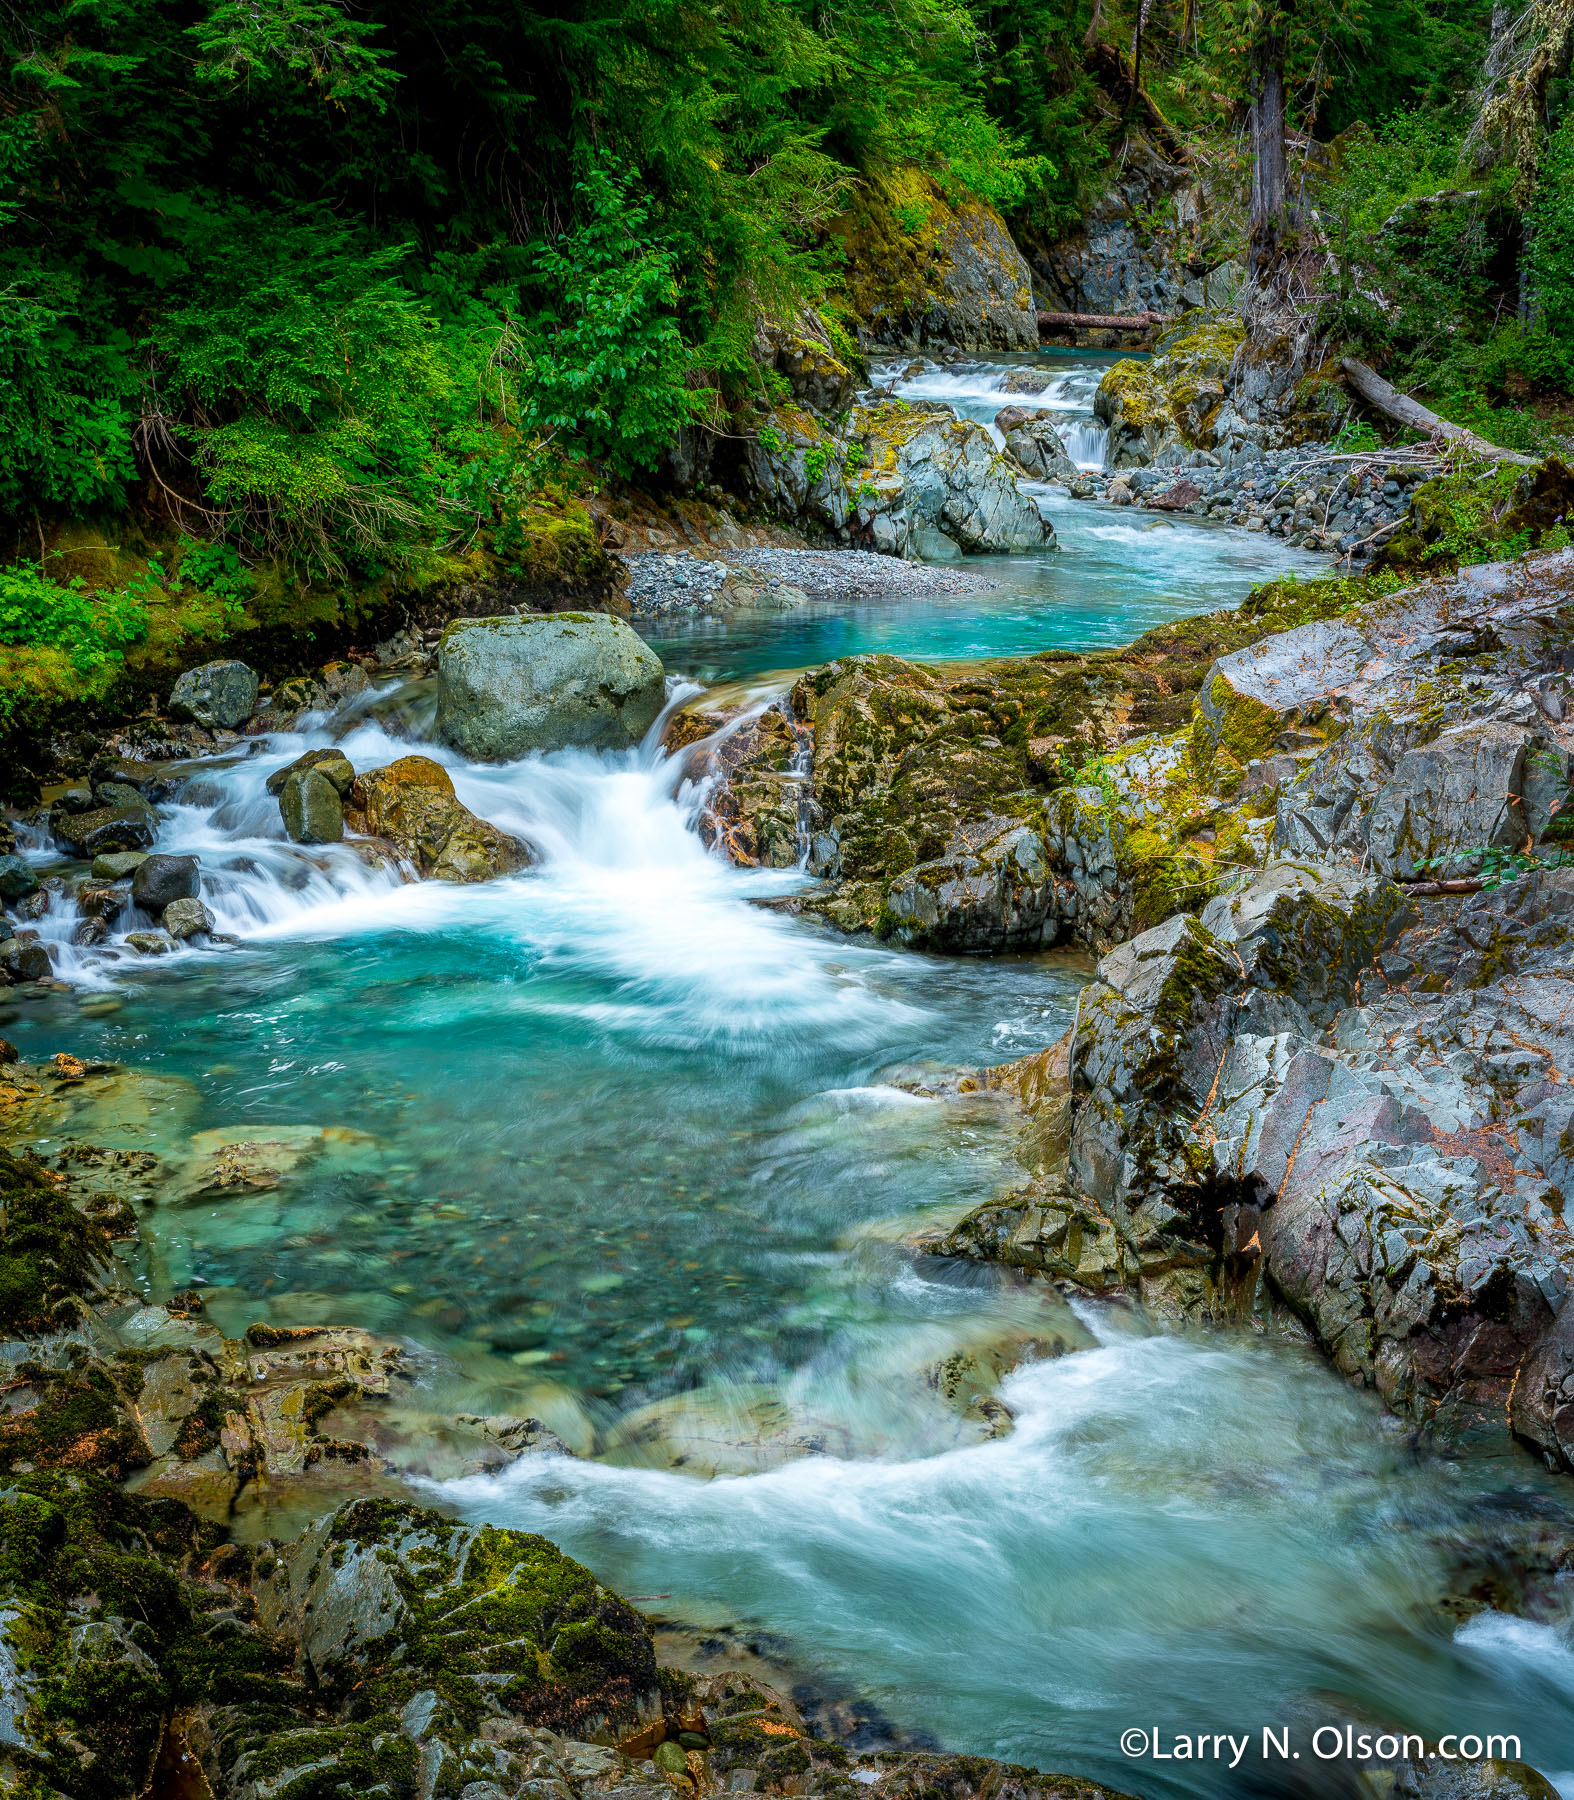 Ohanapecosh River, Mount Rainier National Park, WA | This flows through an old growth forest, and the water is crystline clear.